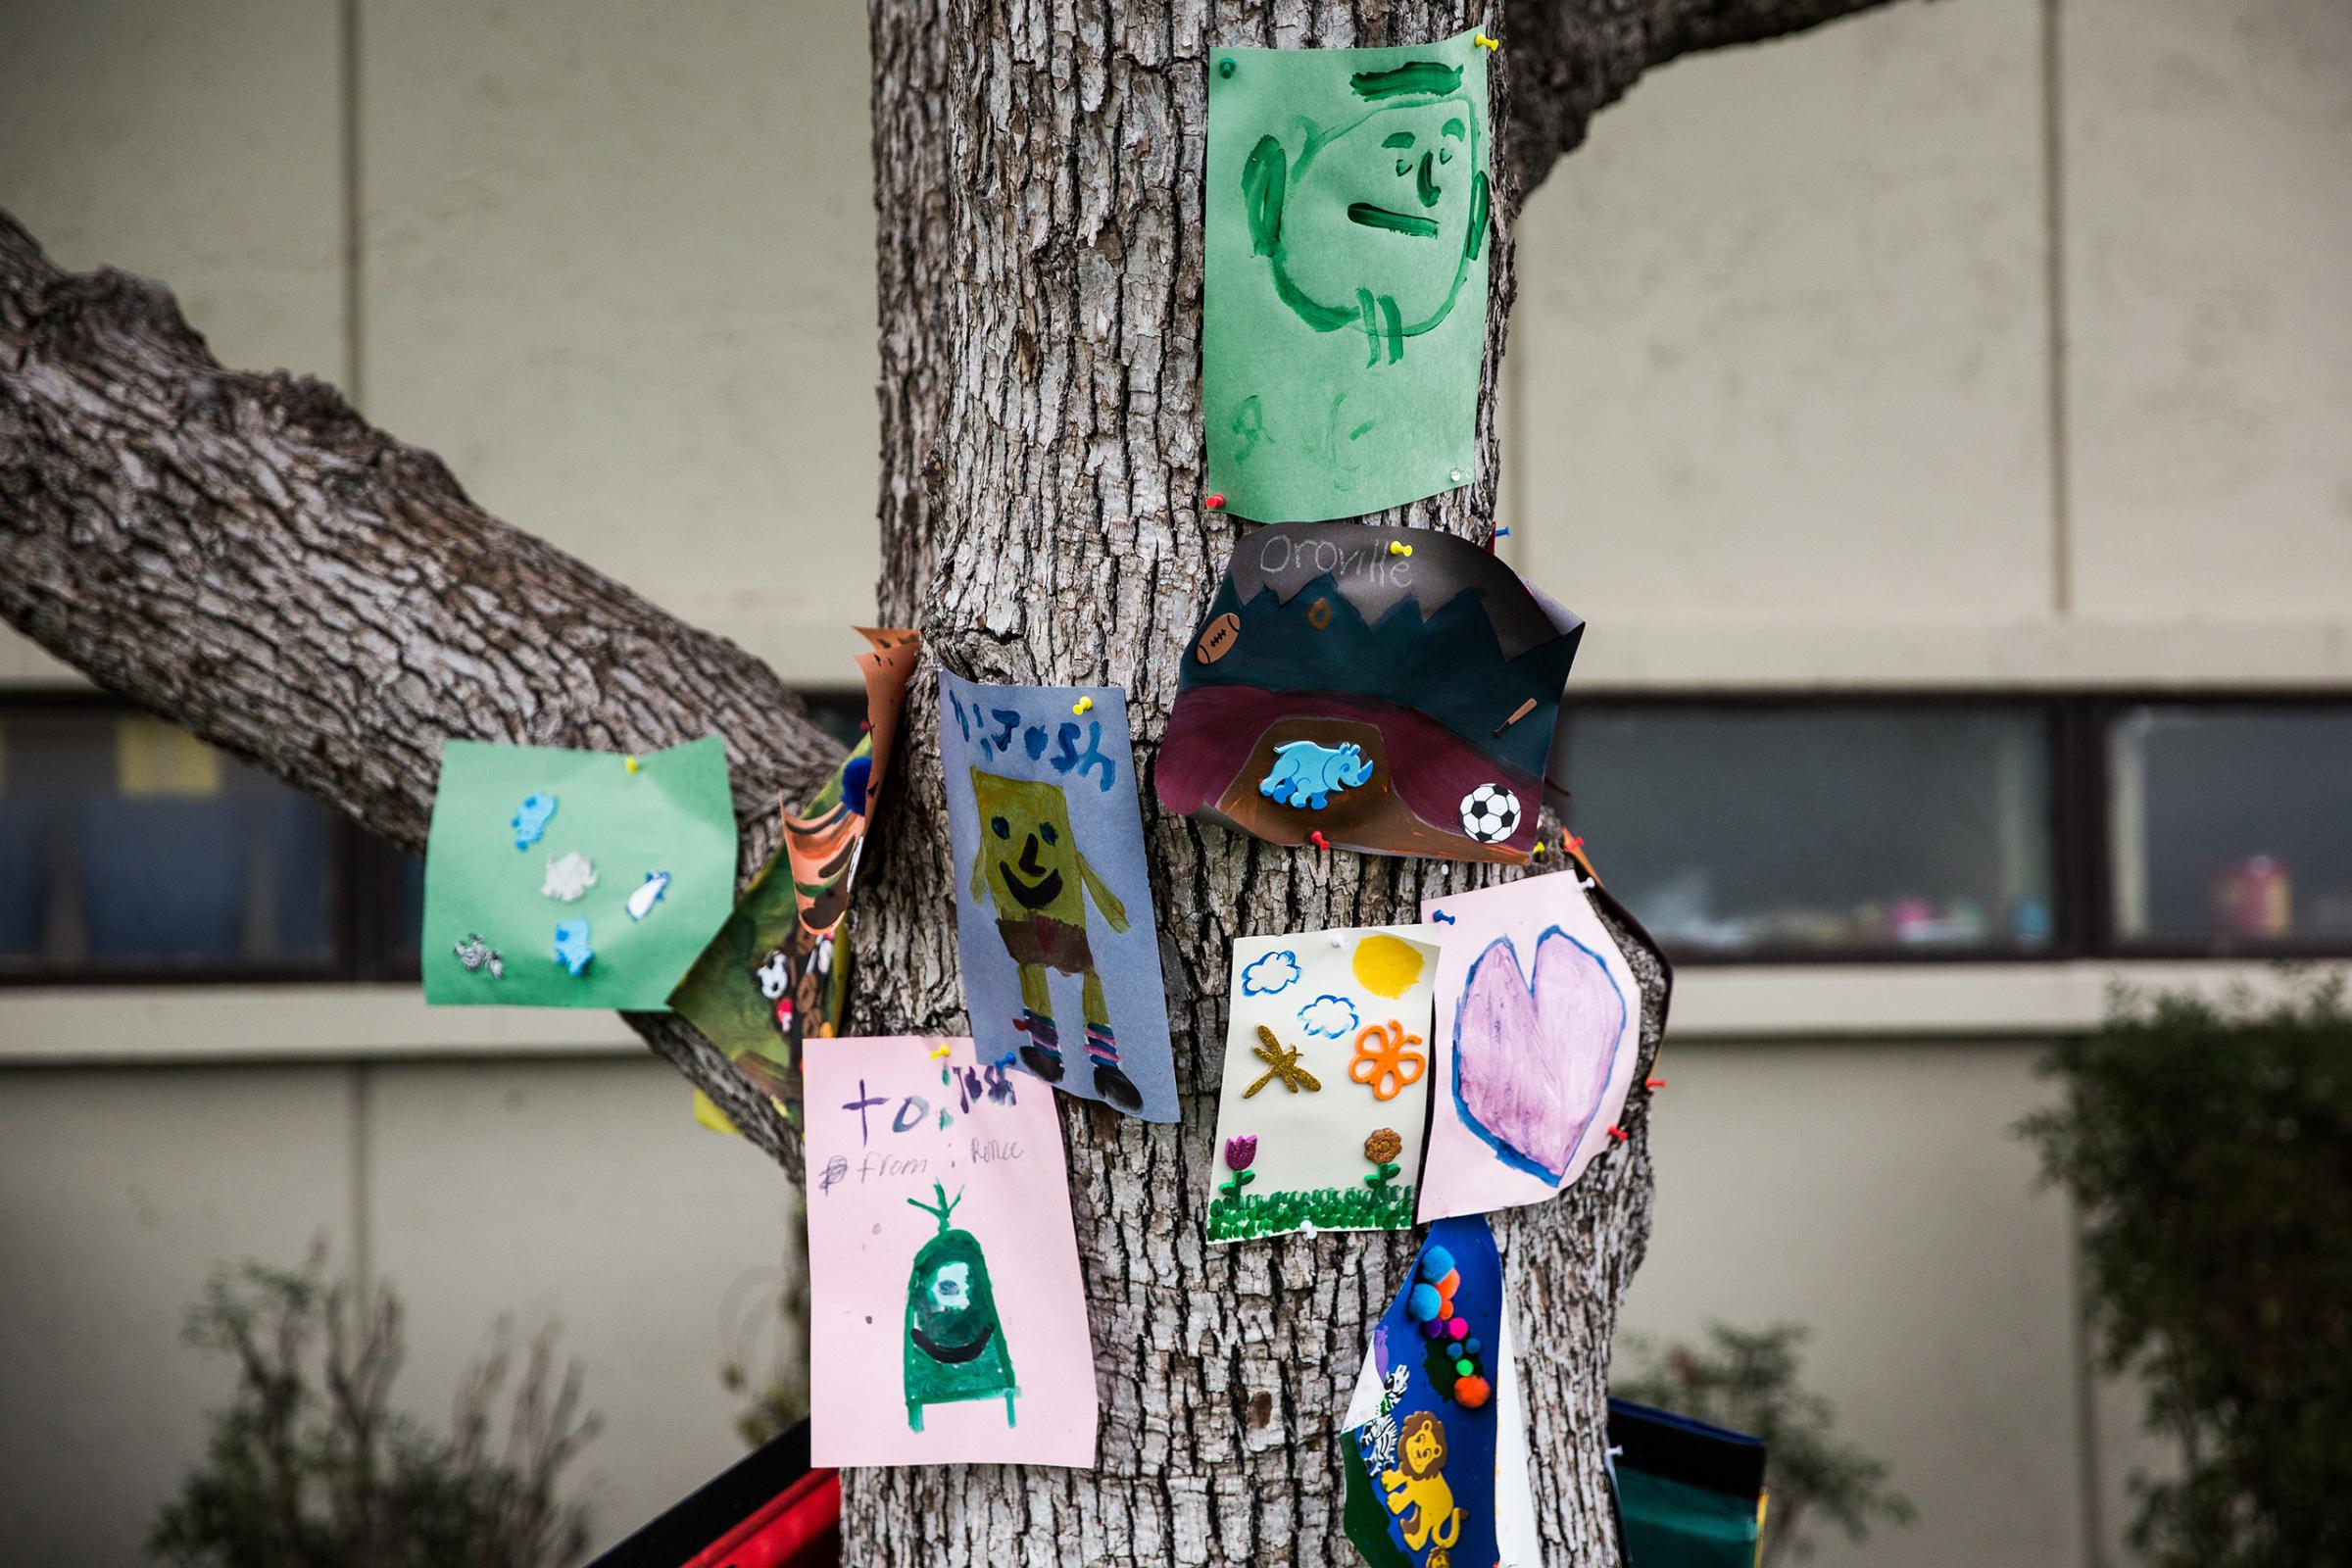 Children's artwork hangs on a tree at the evacuation center at the Butte County Fairgrounds in Chico, California on Feb. 15, 2017.